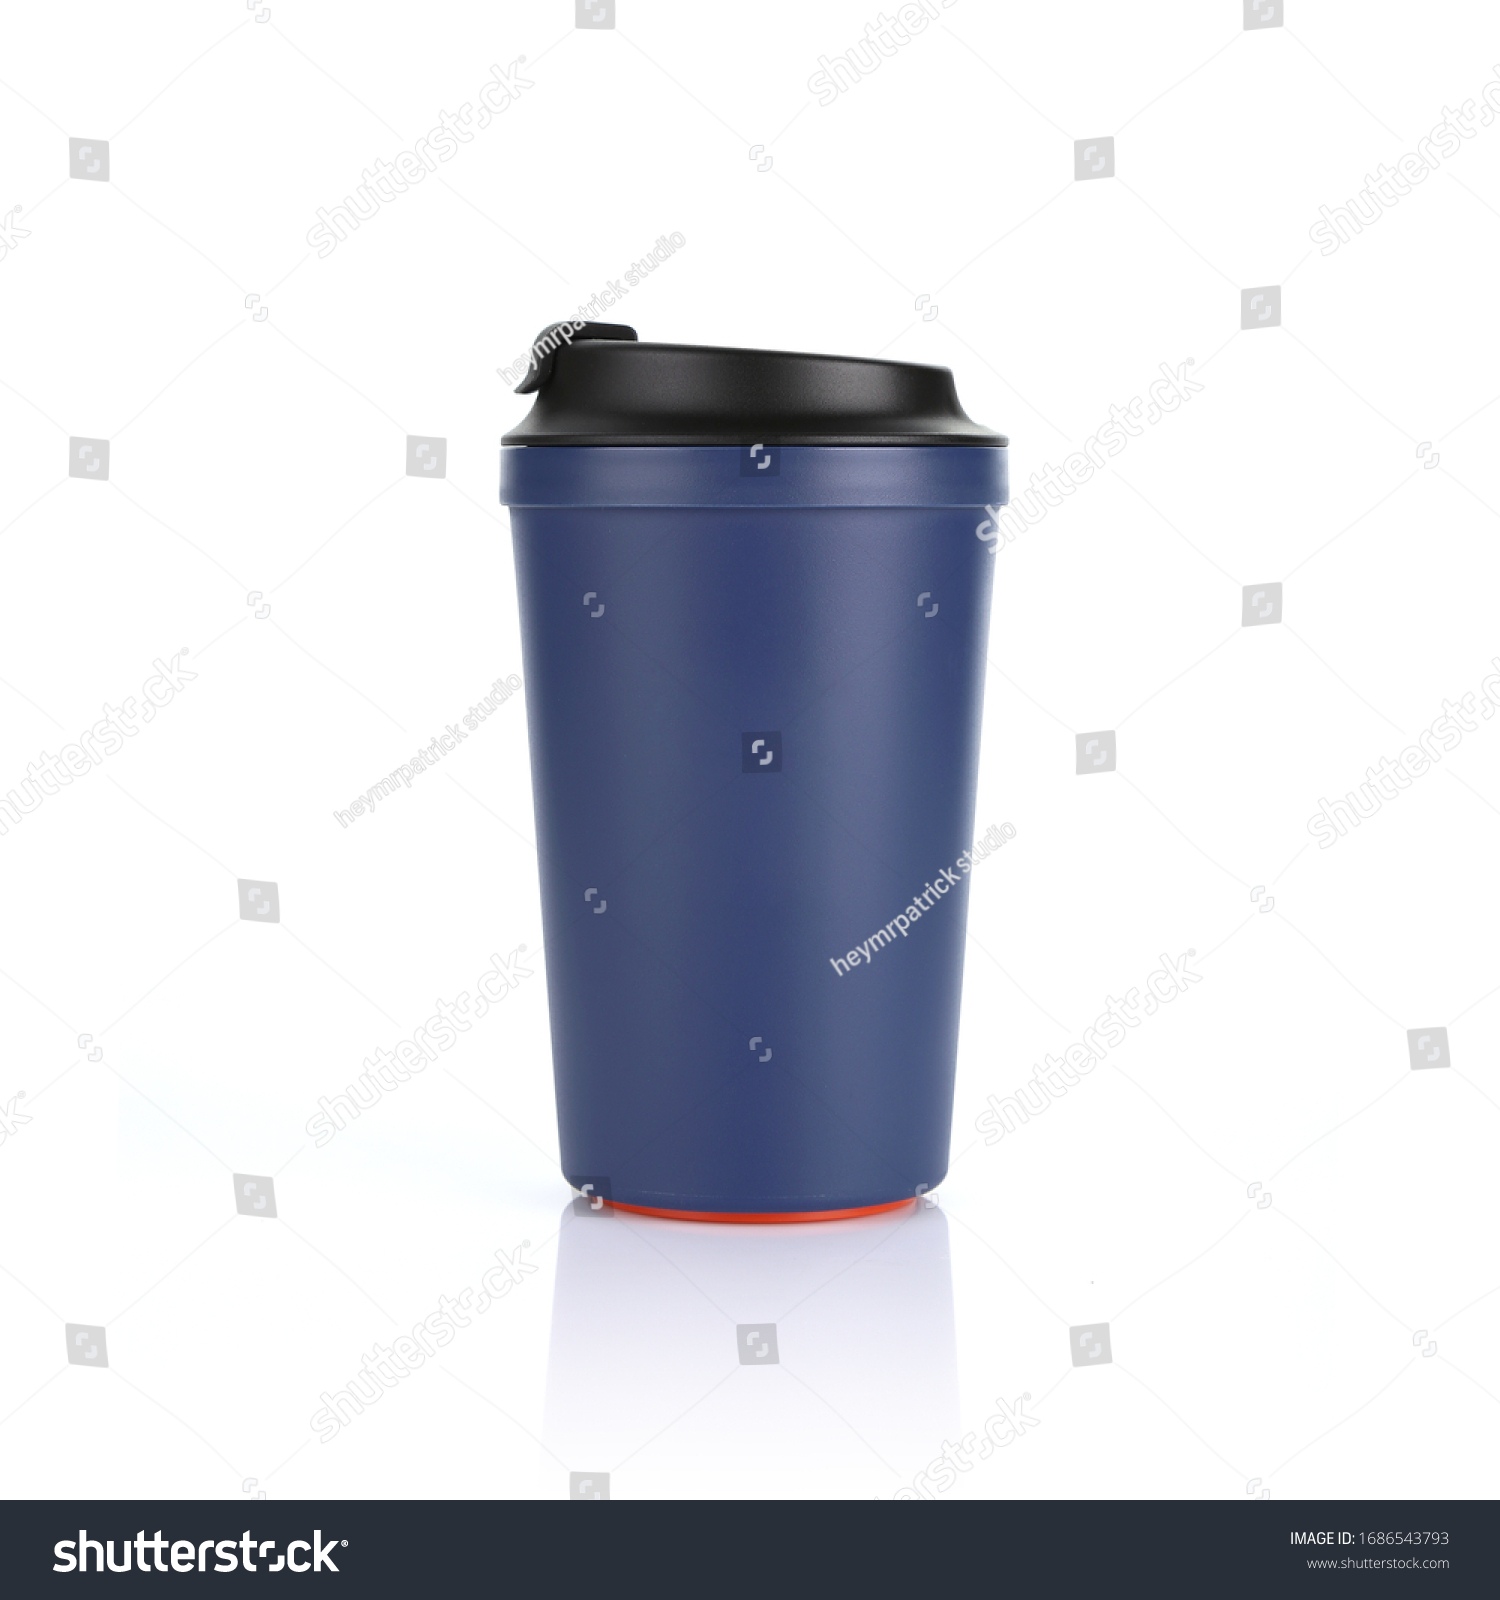 Classic blue colour anti slip suction coffee mug isolated on white background. Front view with reflection. Suitable for hot & cold beverage. For branding, mock up and advertisement. #1686543793